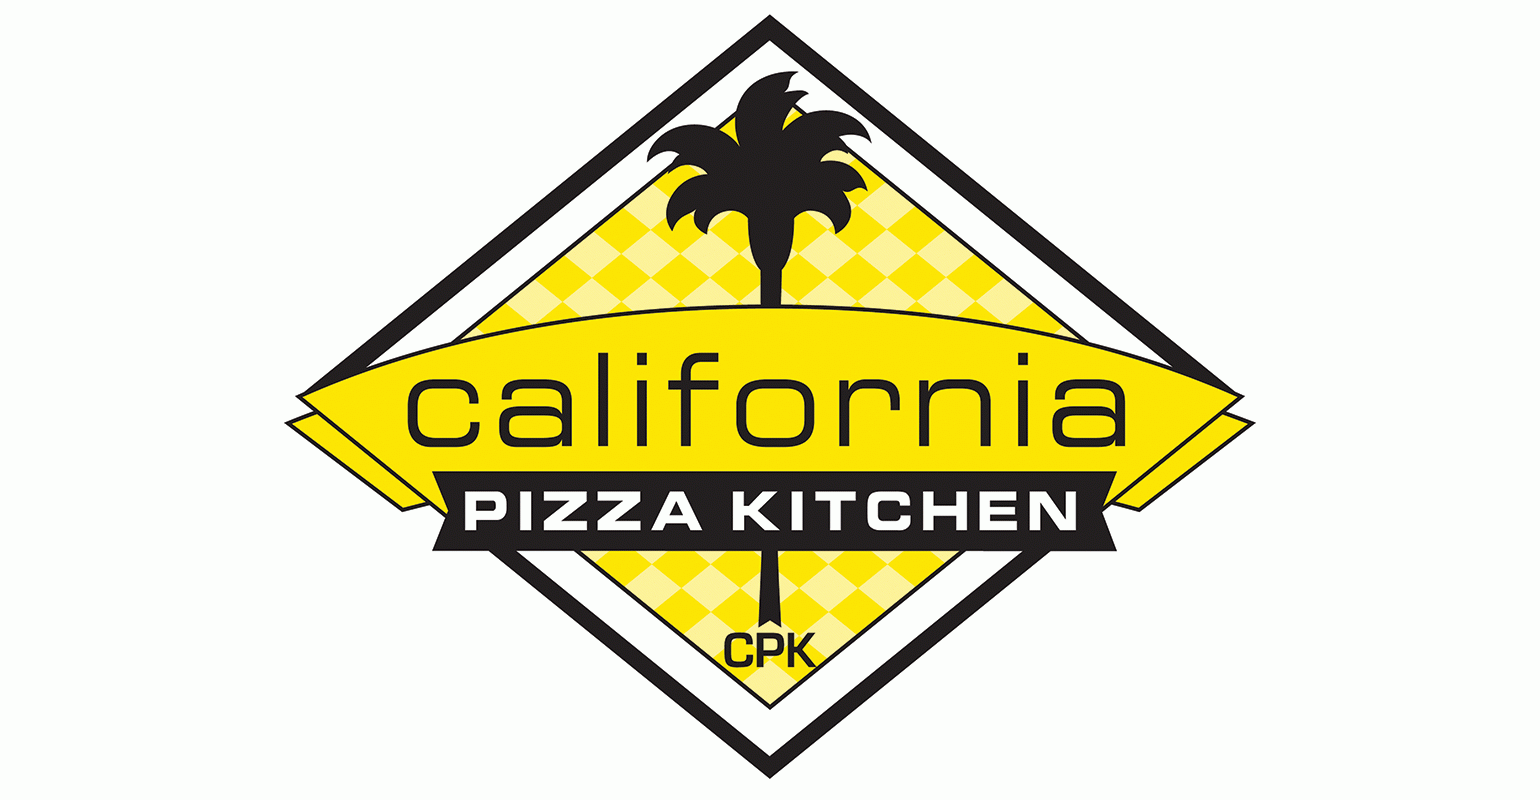 California Pizza Kitchen is latest chain to file for bankruptcy